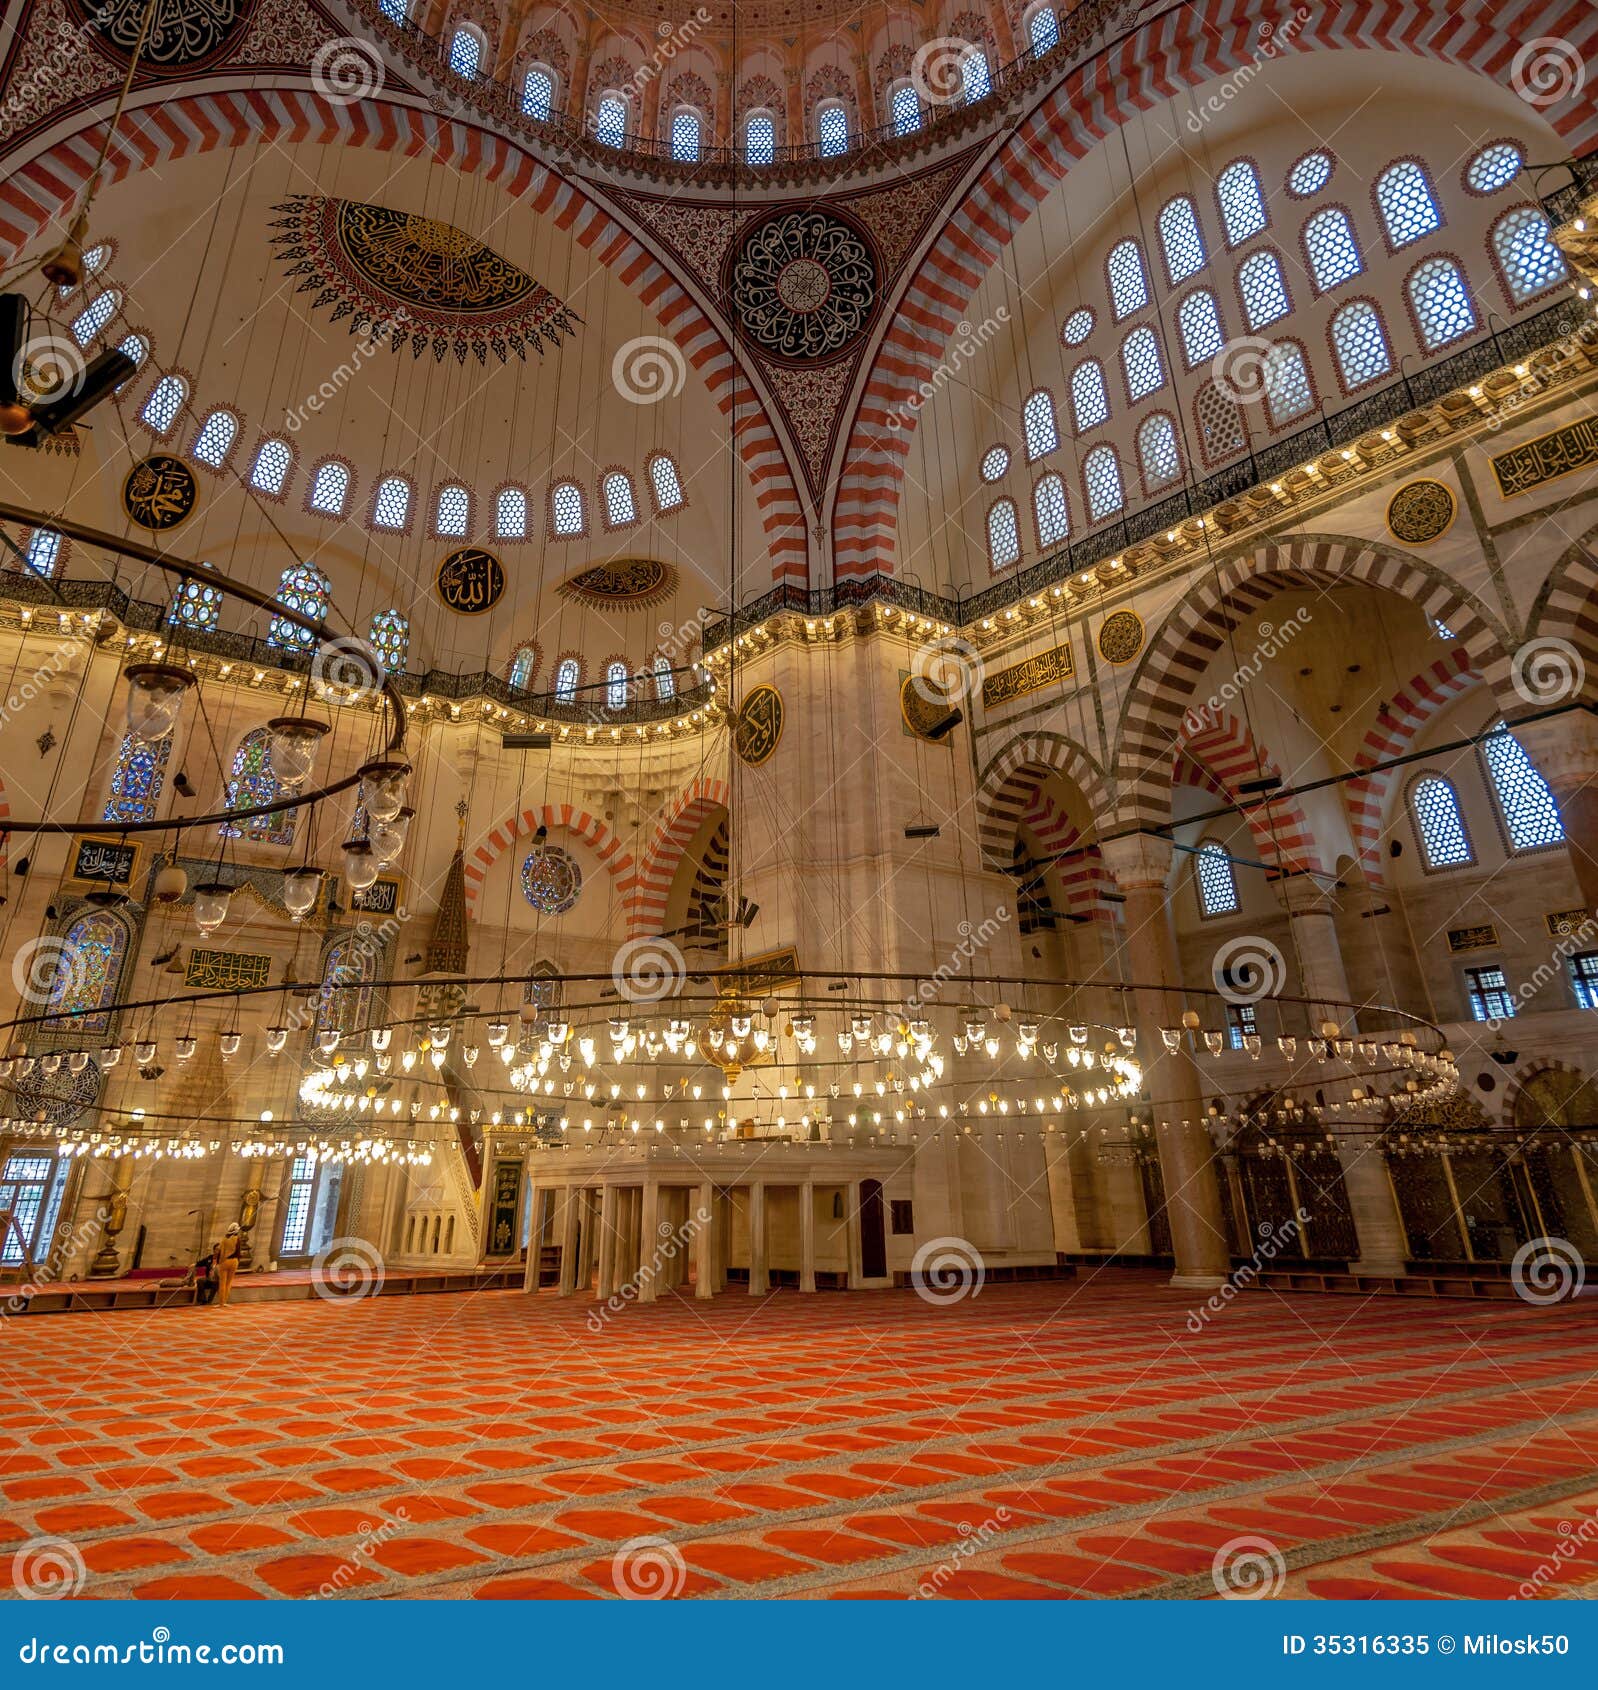 Albums 100+ Pictures How Does The Suleymaniye Mosque Illustrate Power ...